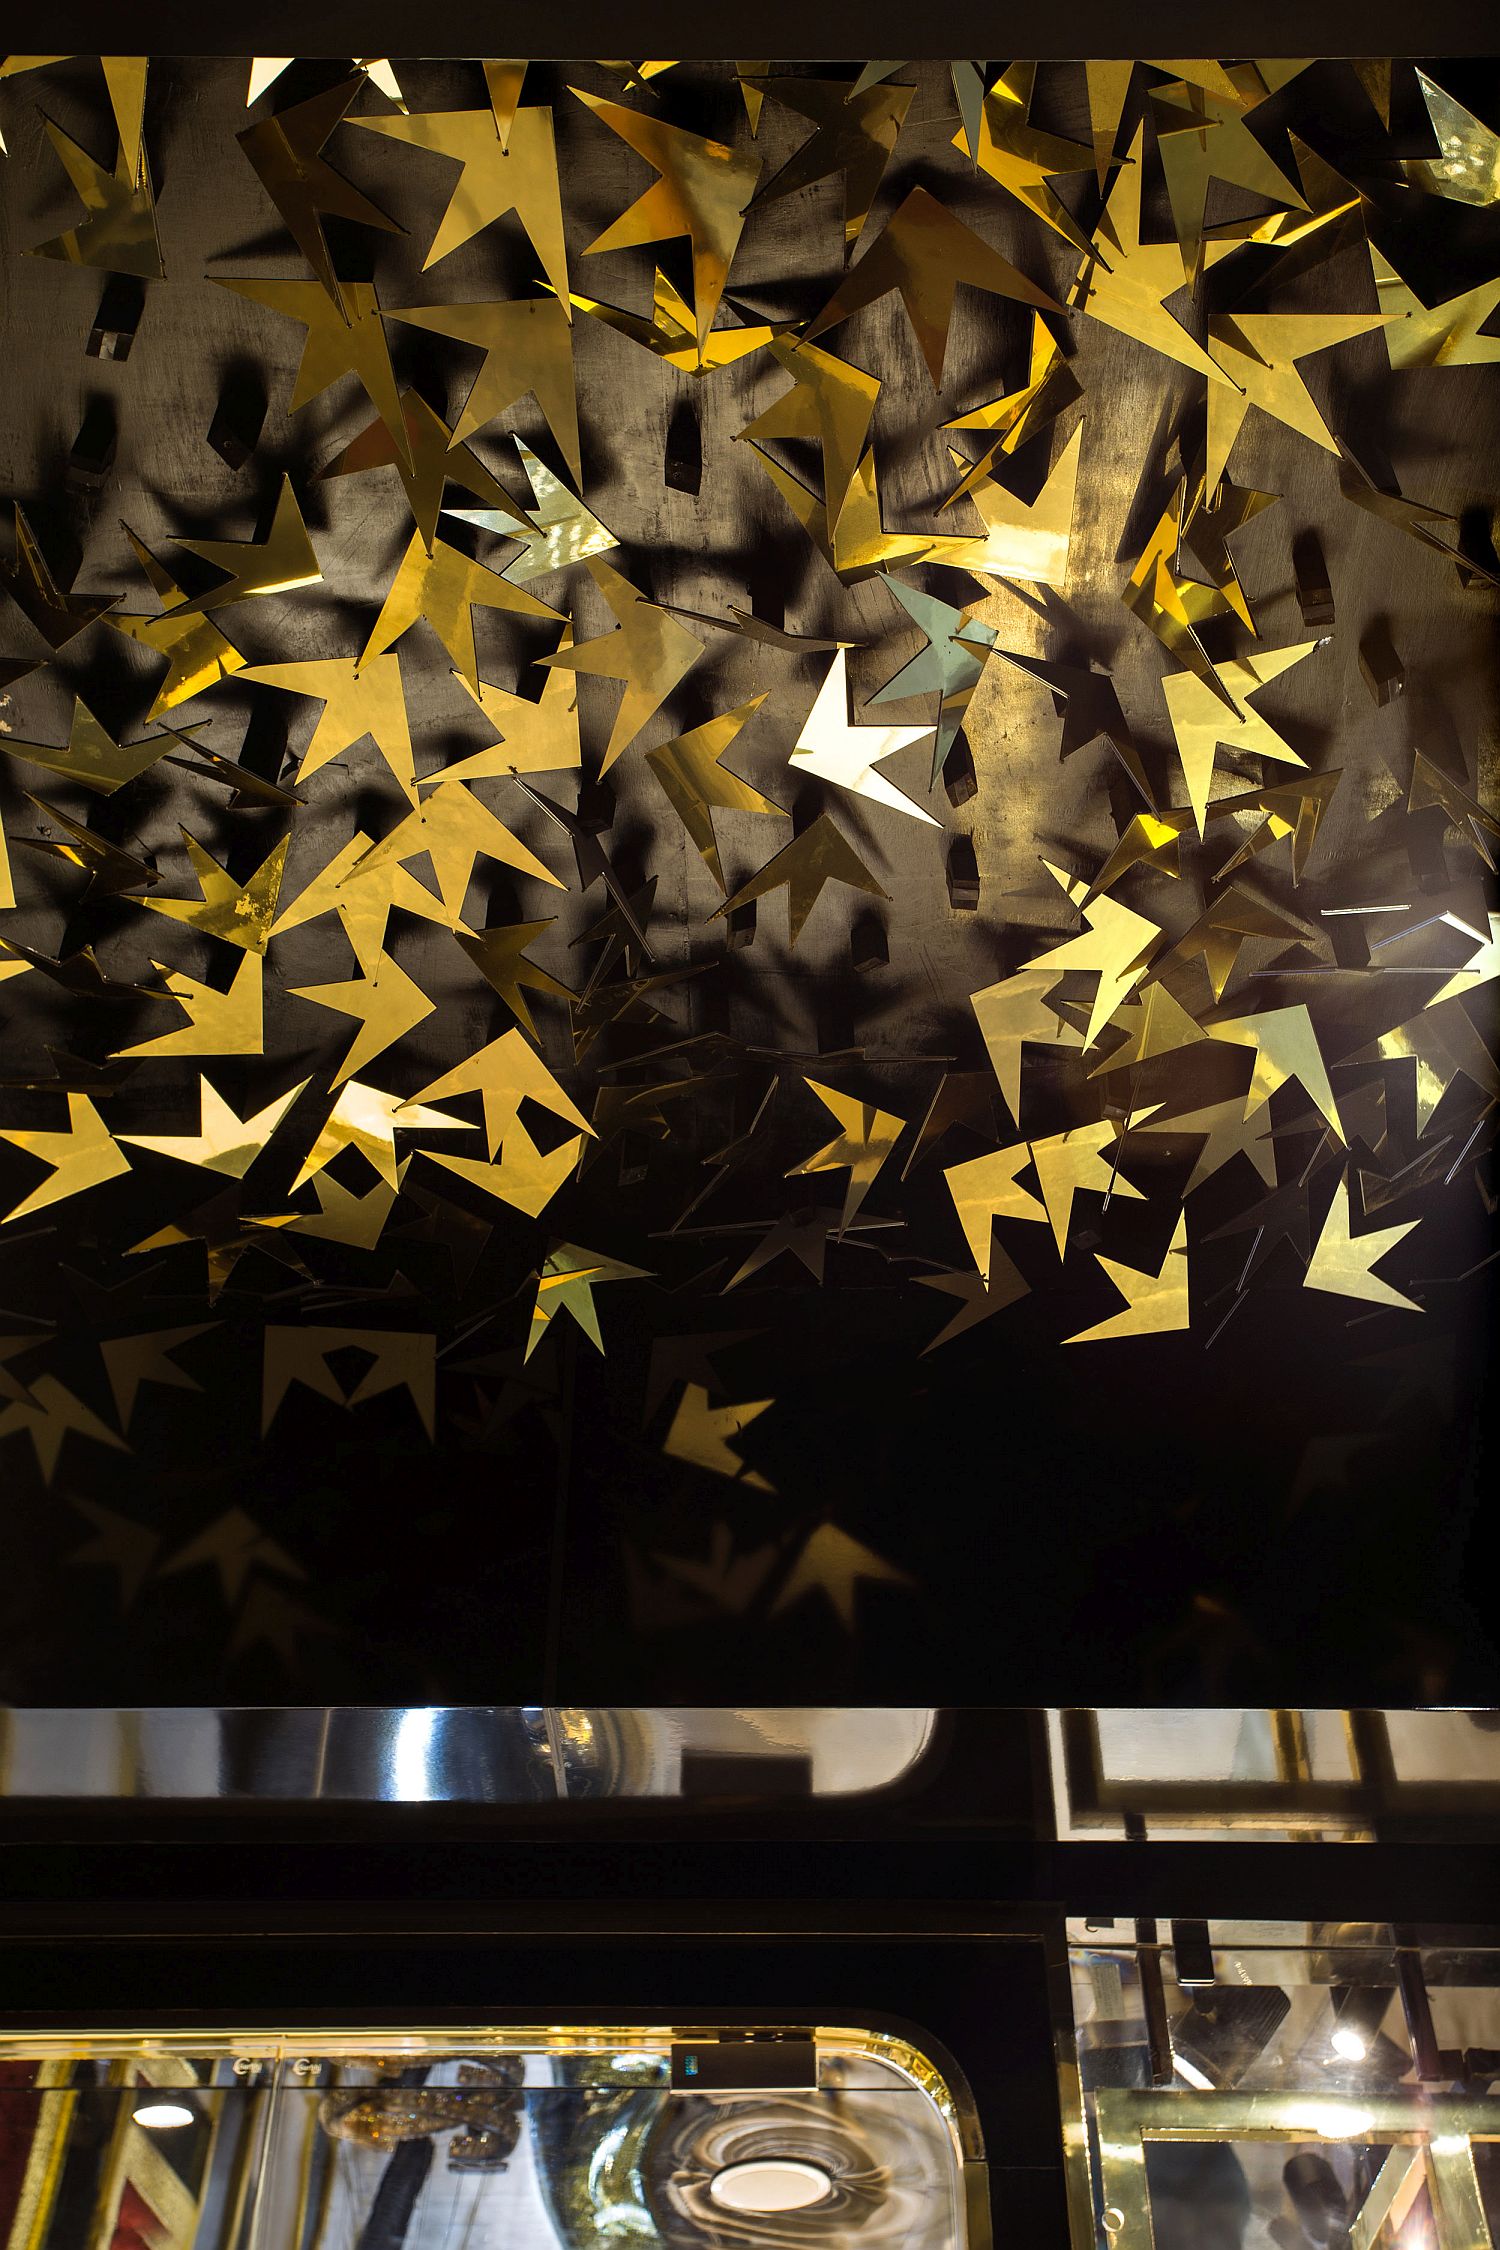 Black-backdrop-coupled-with-leaf-like-design-in-gold-welcomes-you-at-the-jewelry-store-11593